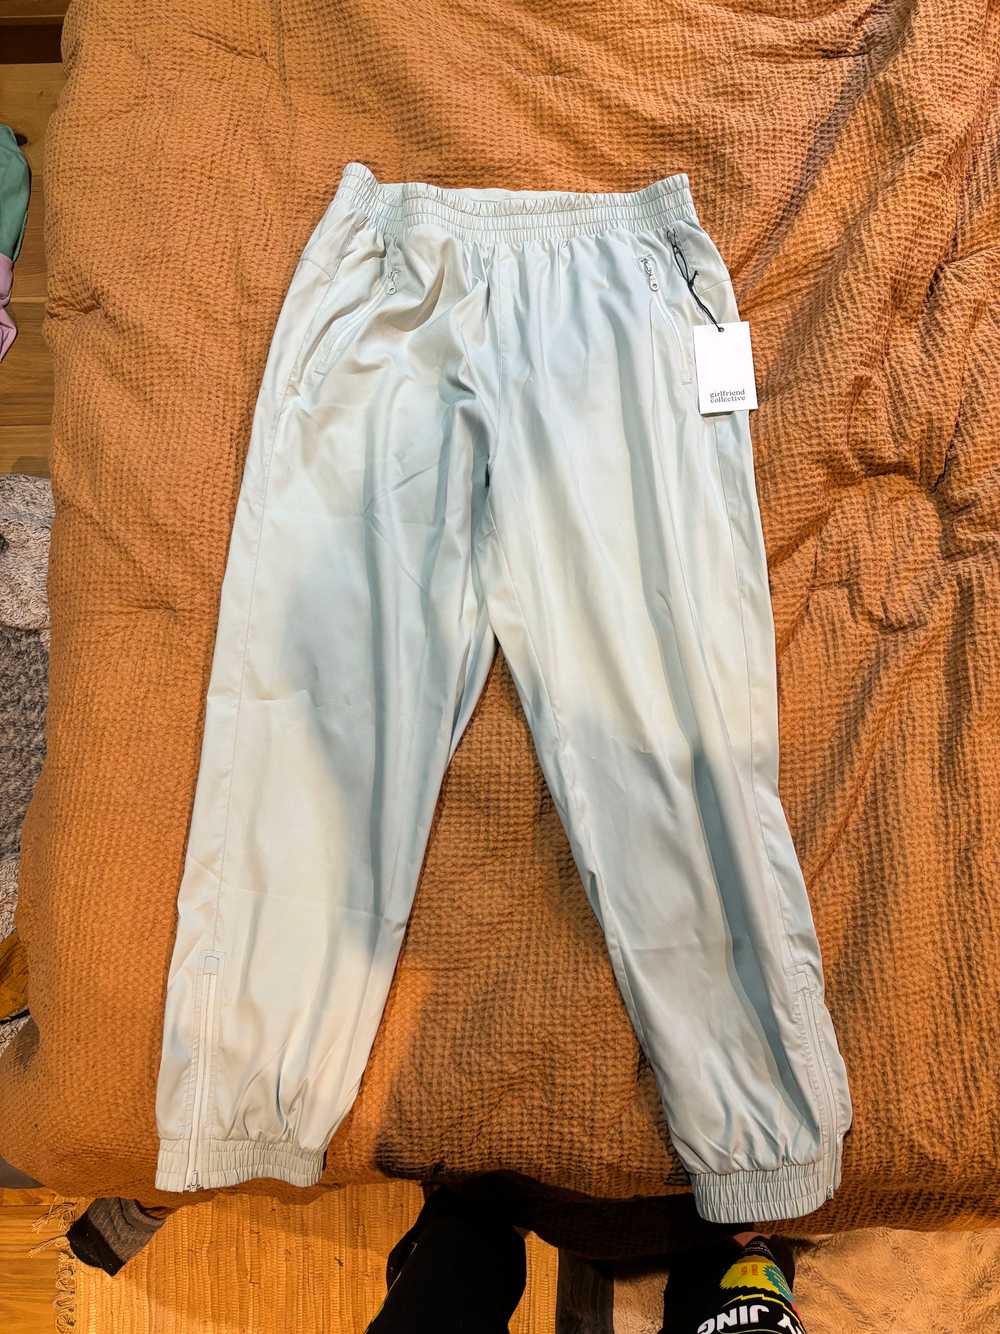 Girlfriend Collective Glass Summit Track Pant - image 2